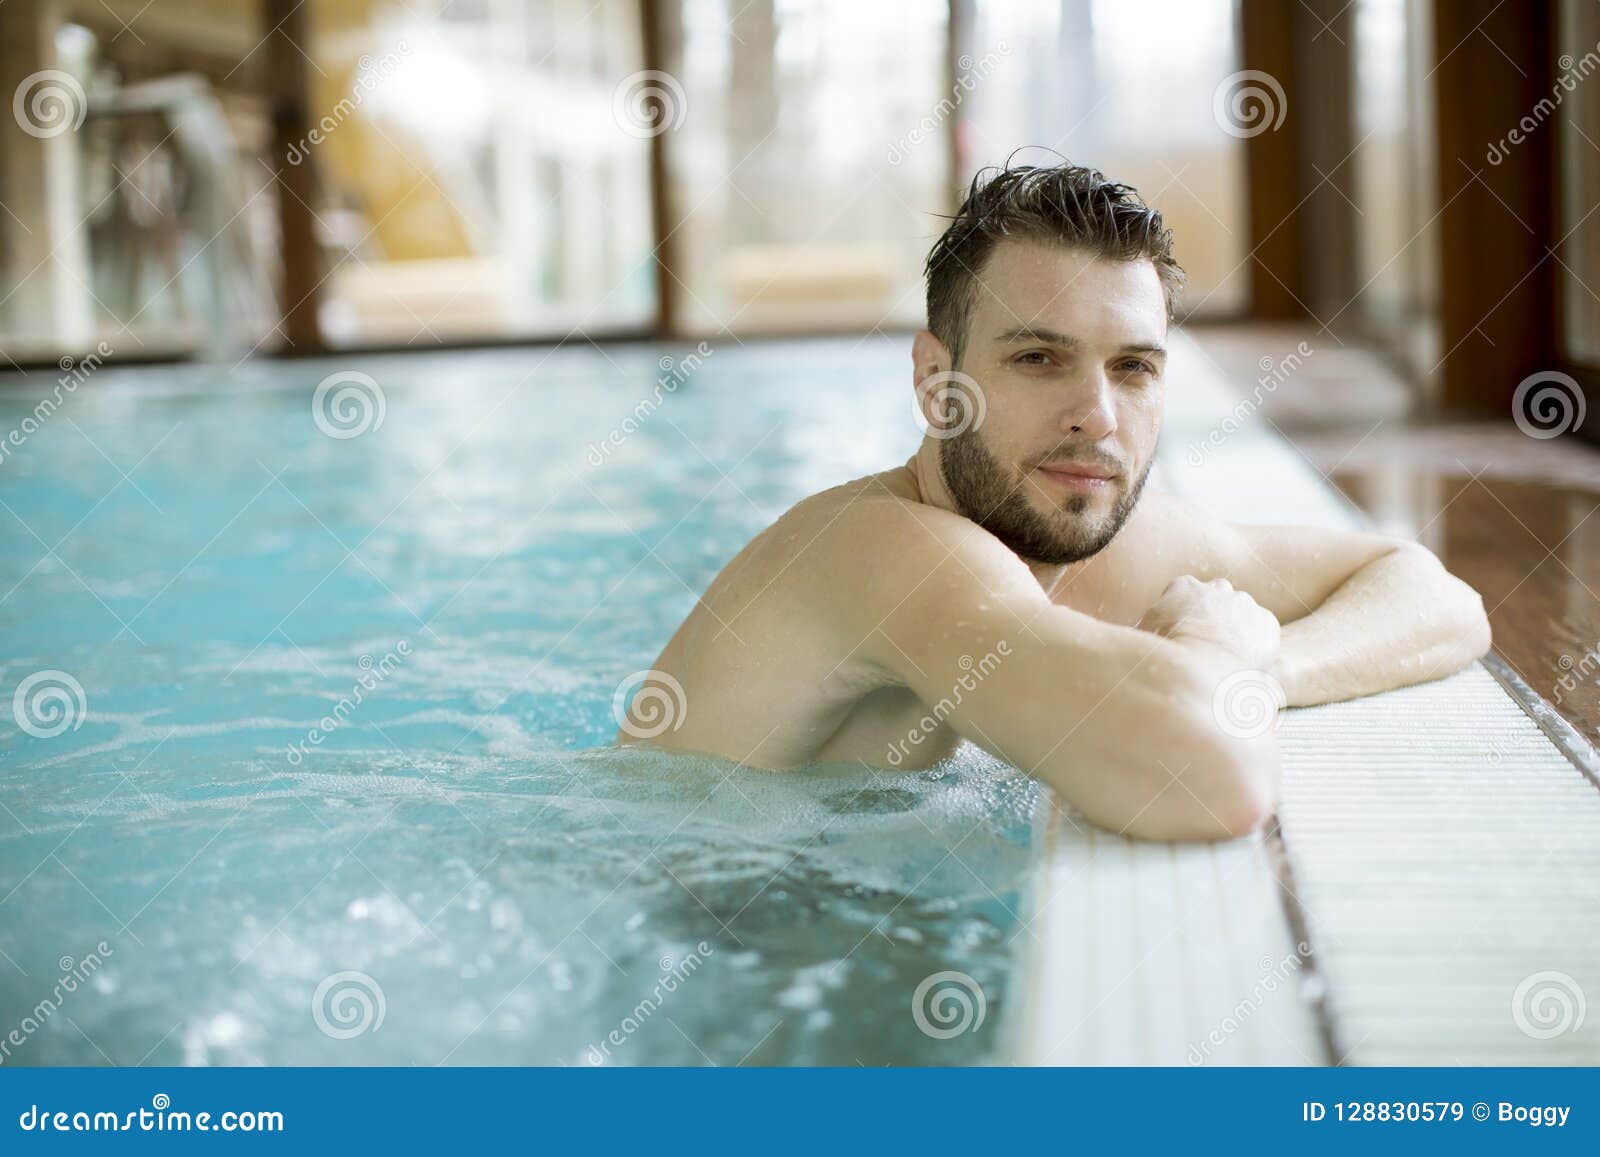 Handsome Young Man Relaxing In Hot Tub Stock Image Image Of Caucasian Thalassotherapy 128830579